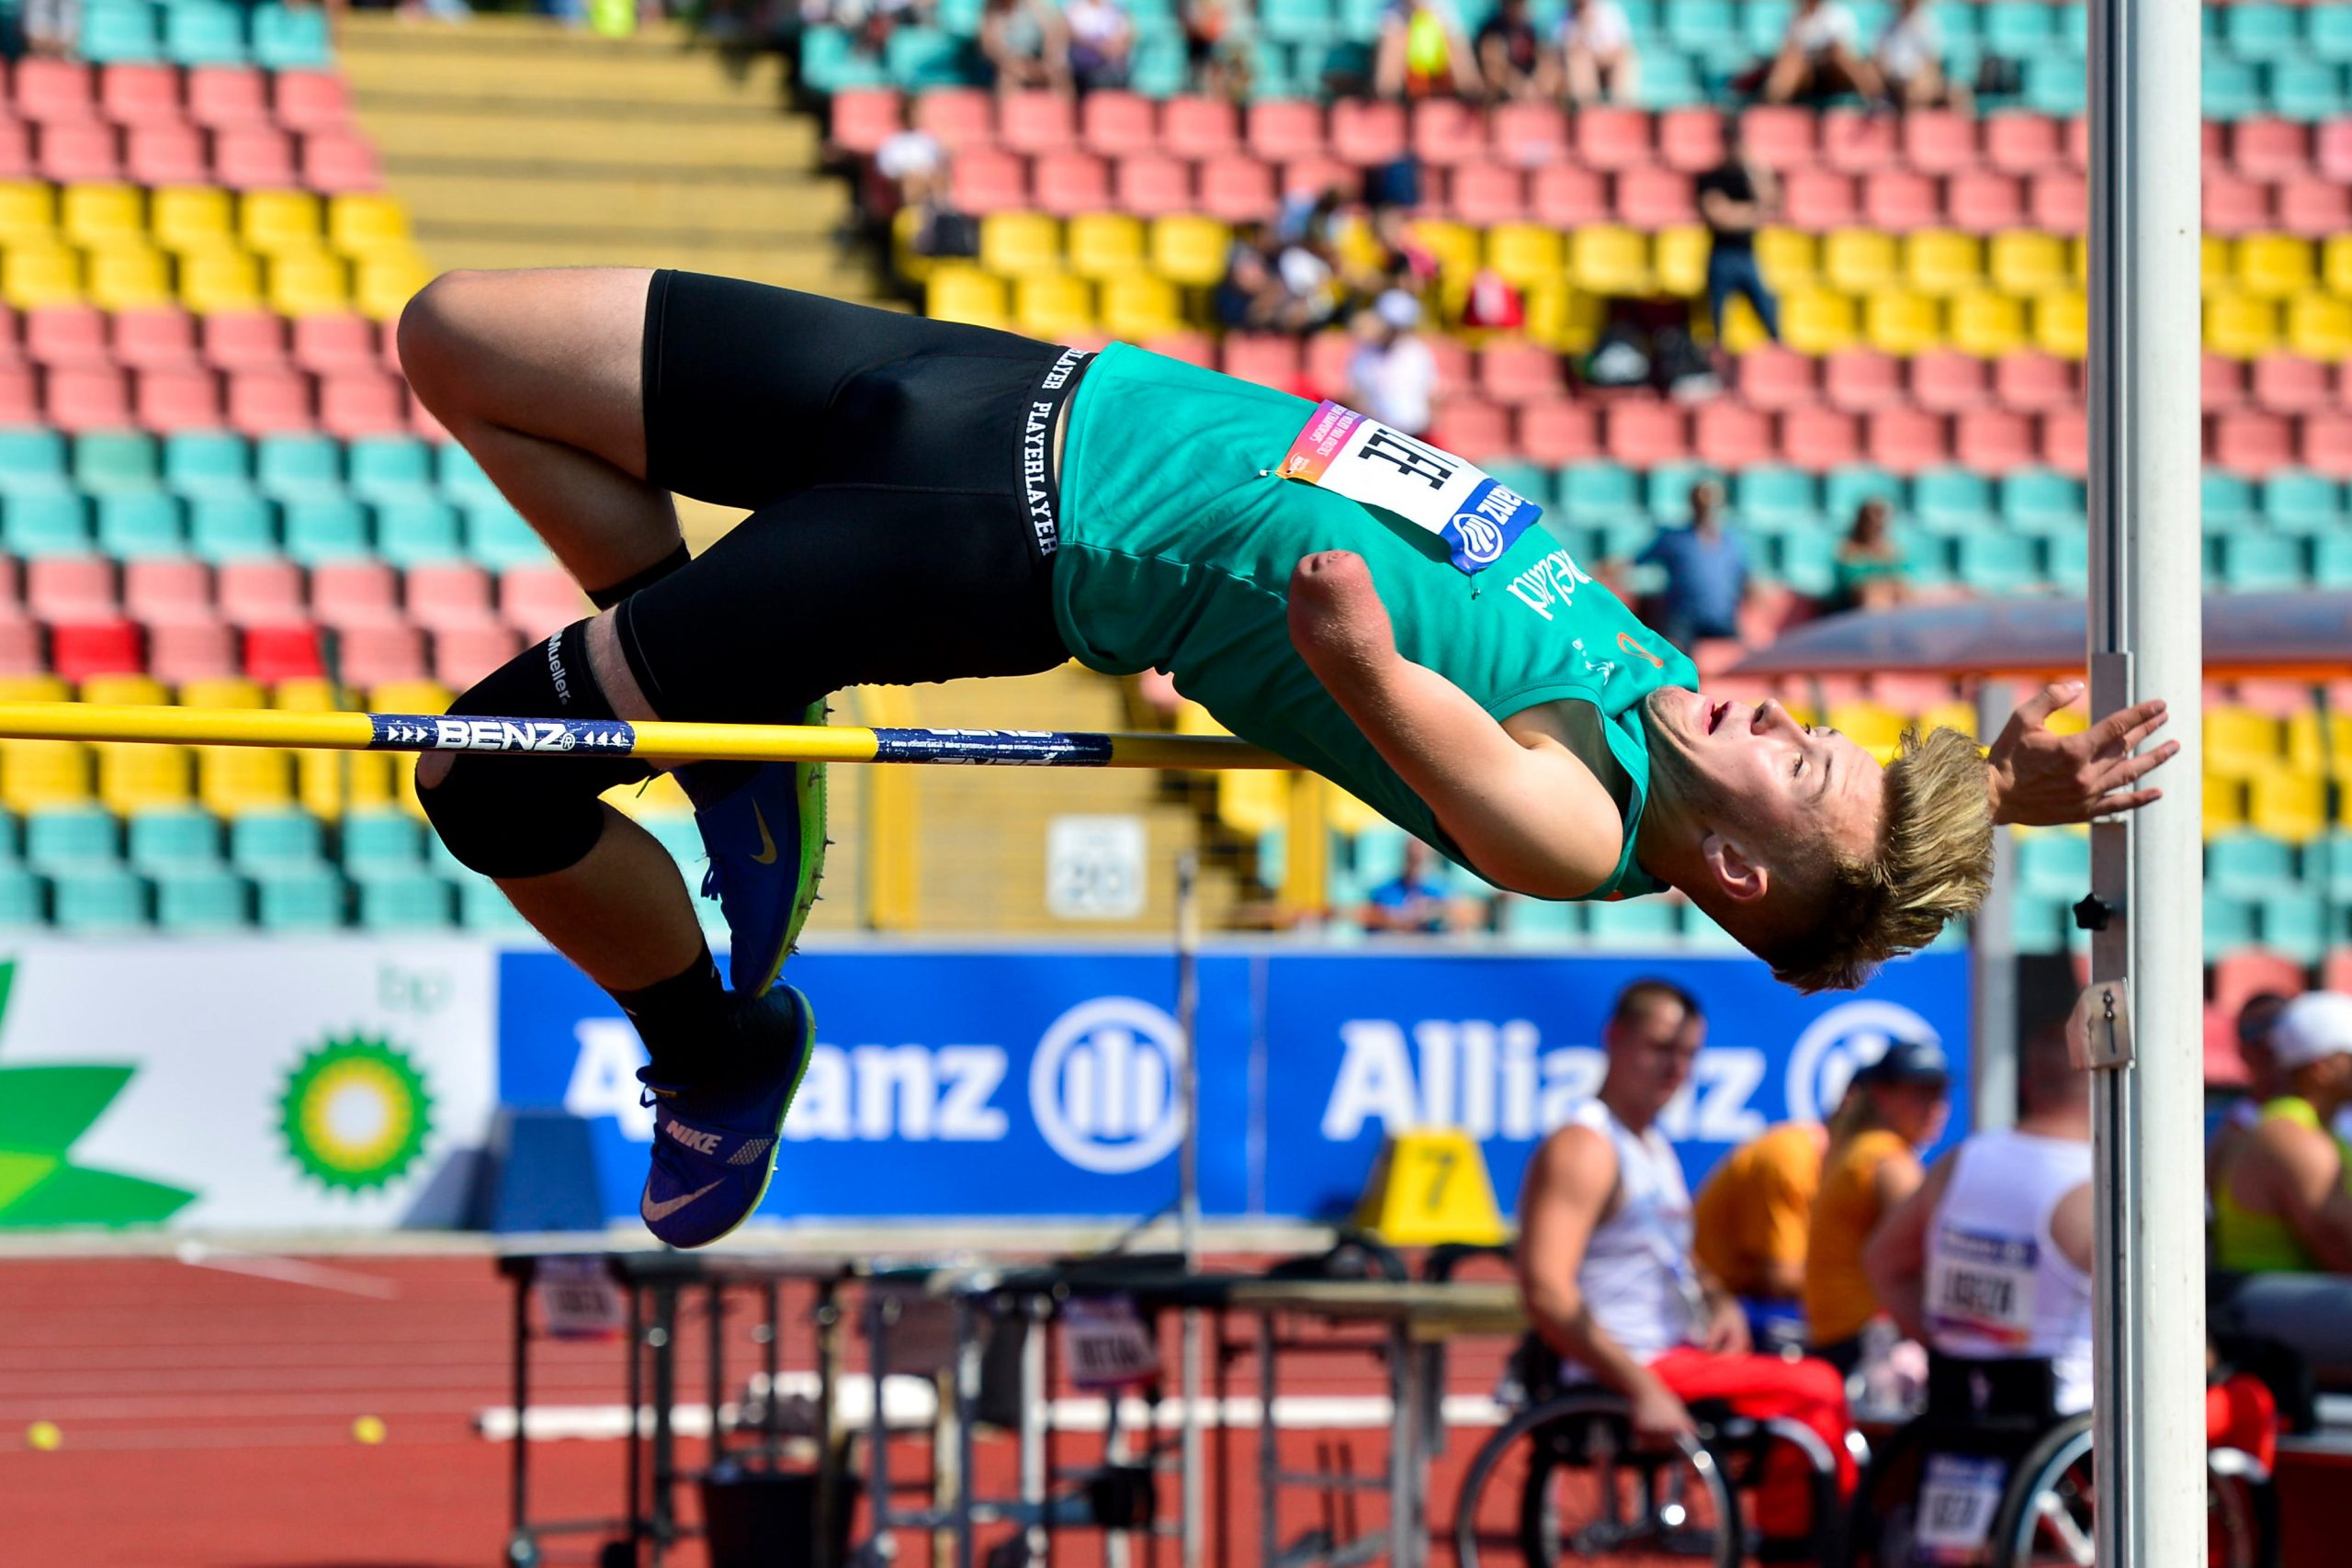 23 August 2018; Jordan Lee of Ireland, competing in the Men's T47 High Jump event during the 2018 World Para Athletics European Championships at Friedrich-Ludwig-Jahn-Sportpark in Berlin, Germany. Photo by Luc Percival/Sportsfile *** NO REPRODUCTION FEE ***